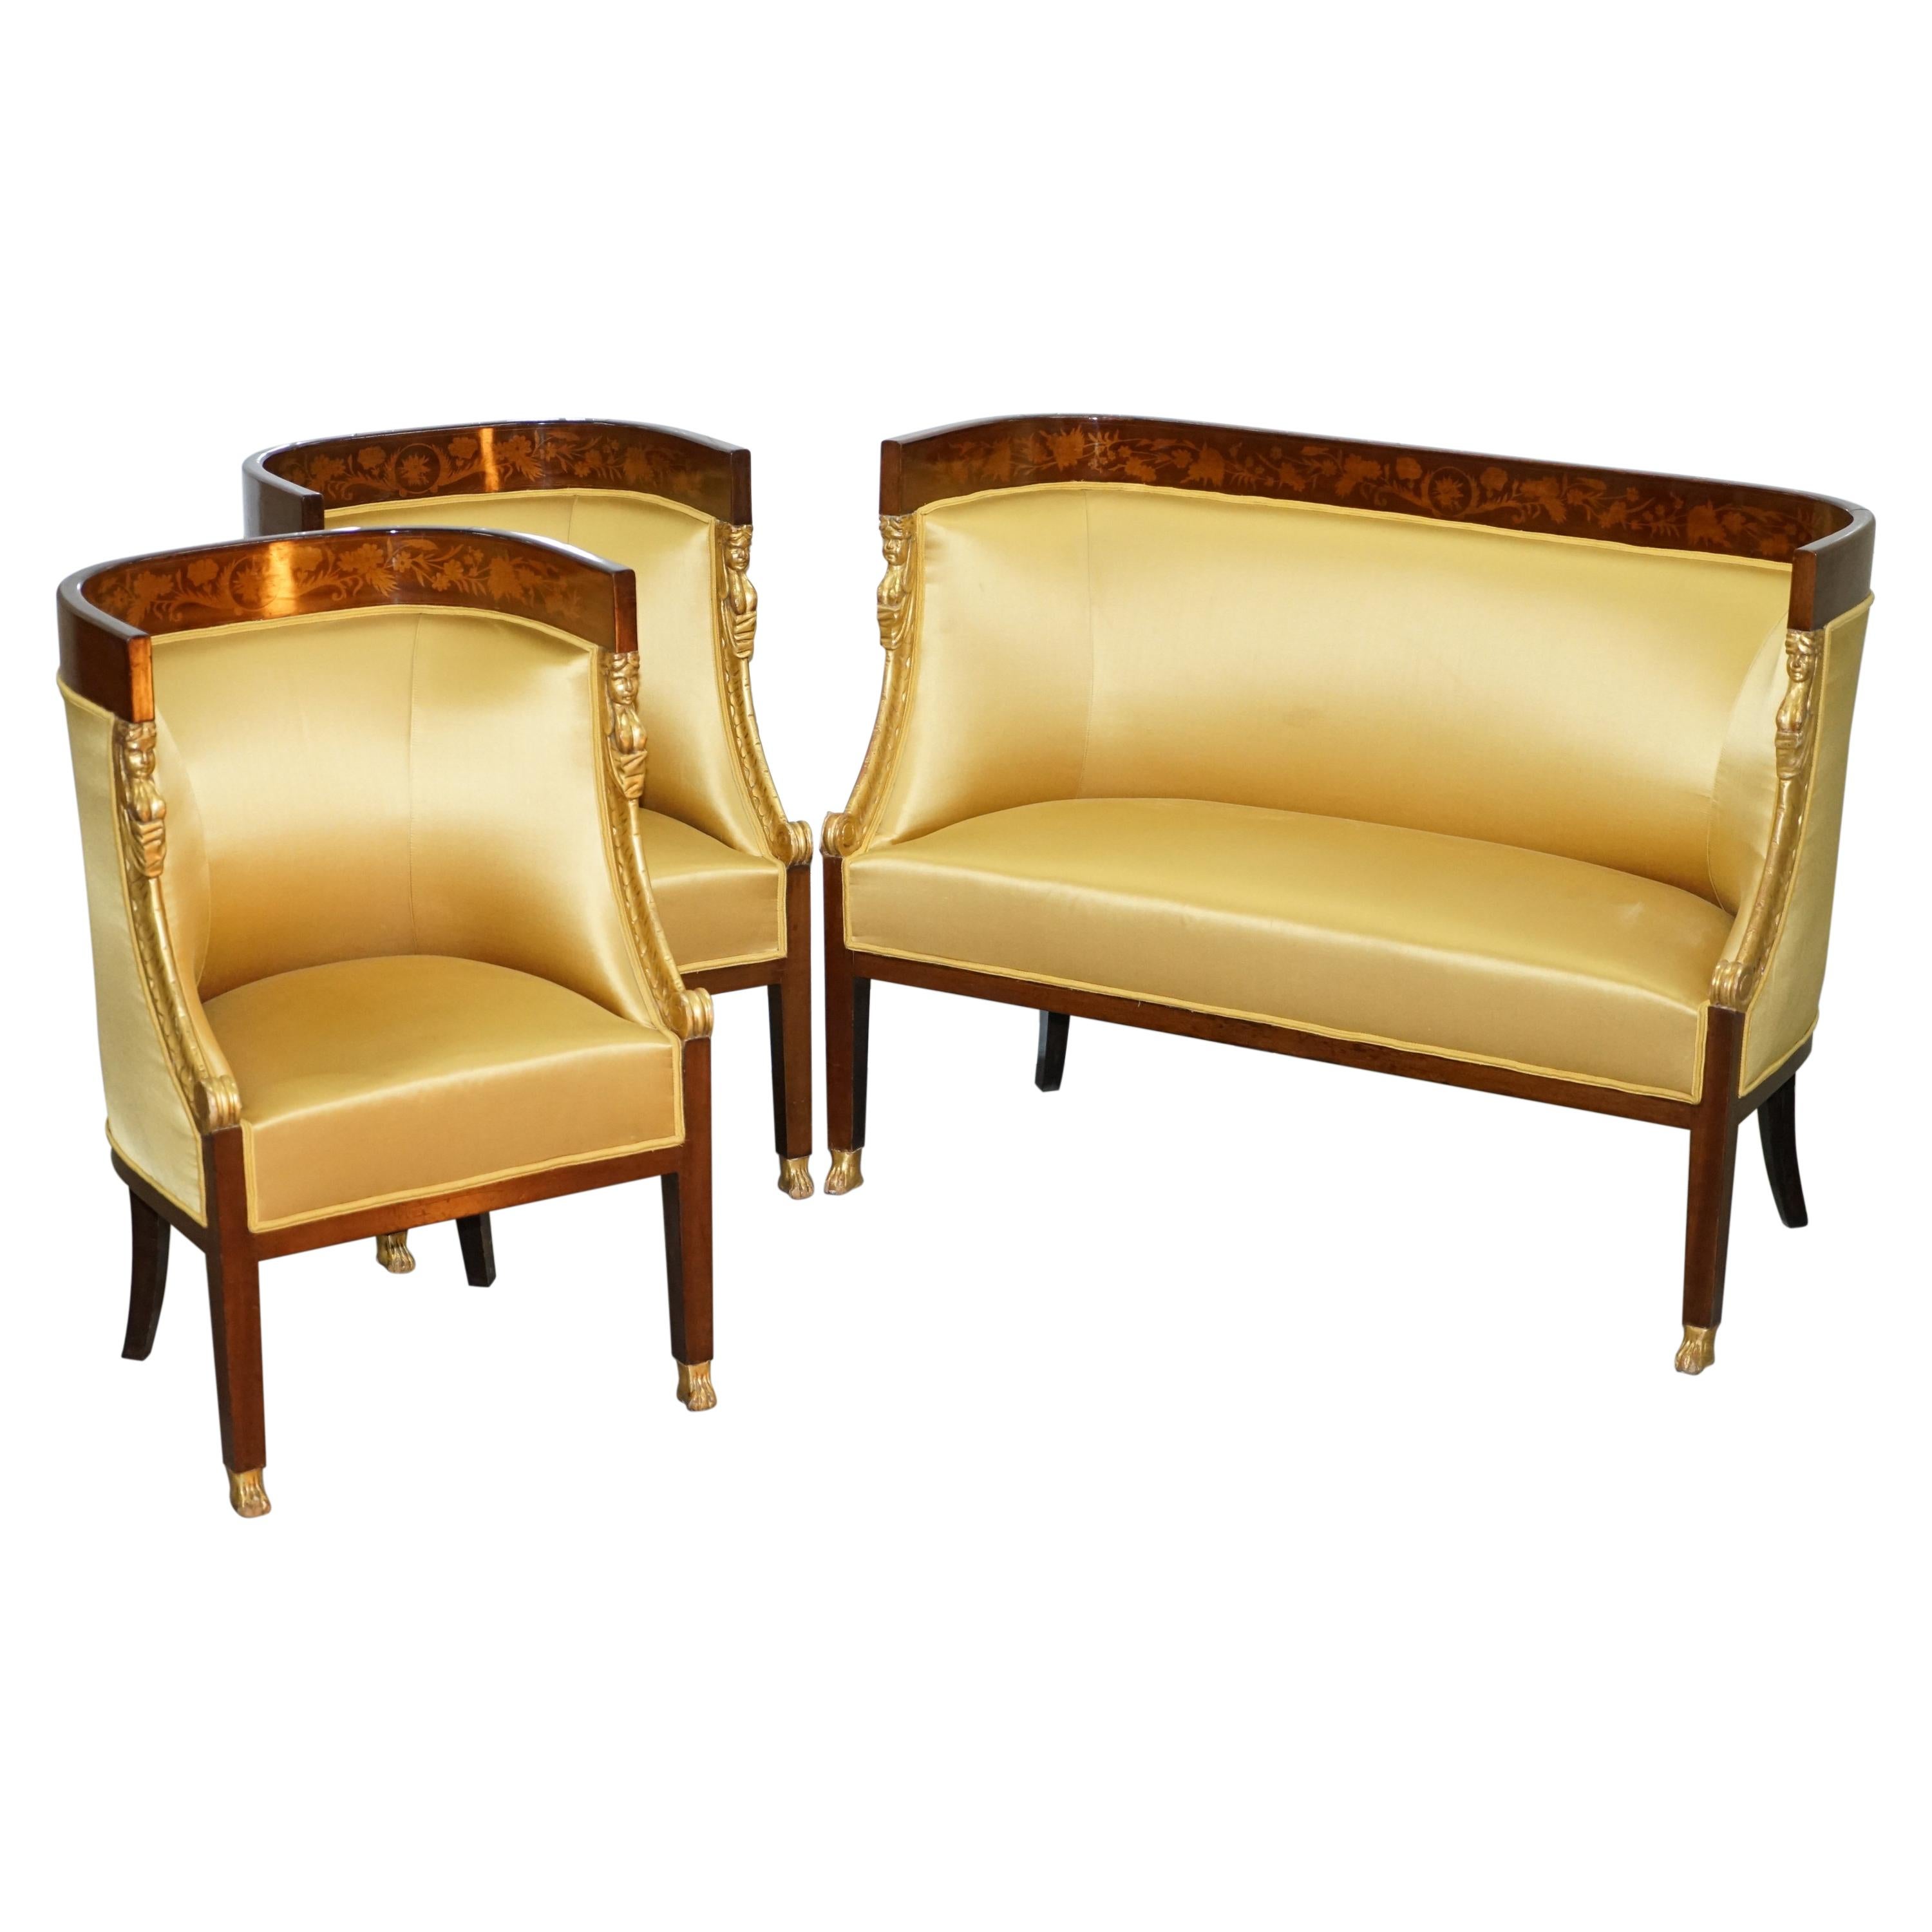 1870 French Empire Marquetry Inlaid Suite Berger Armchairs & Settee Canape, Pair